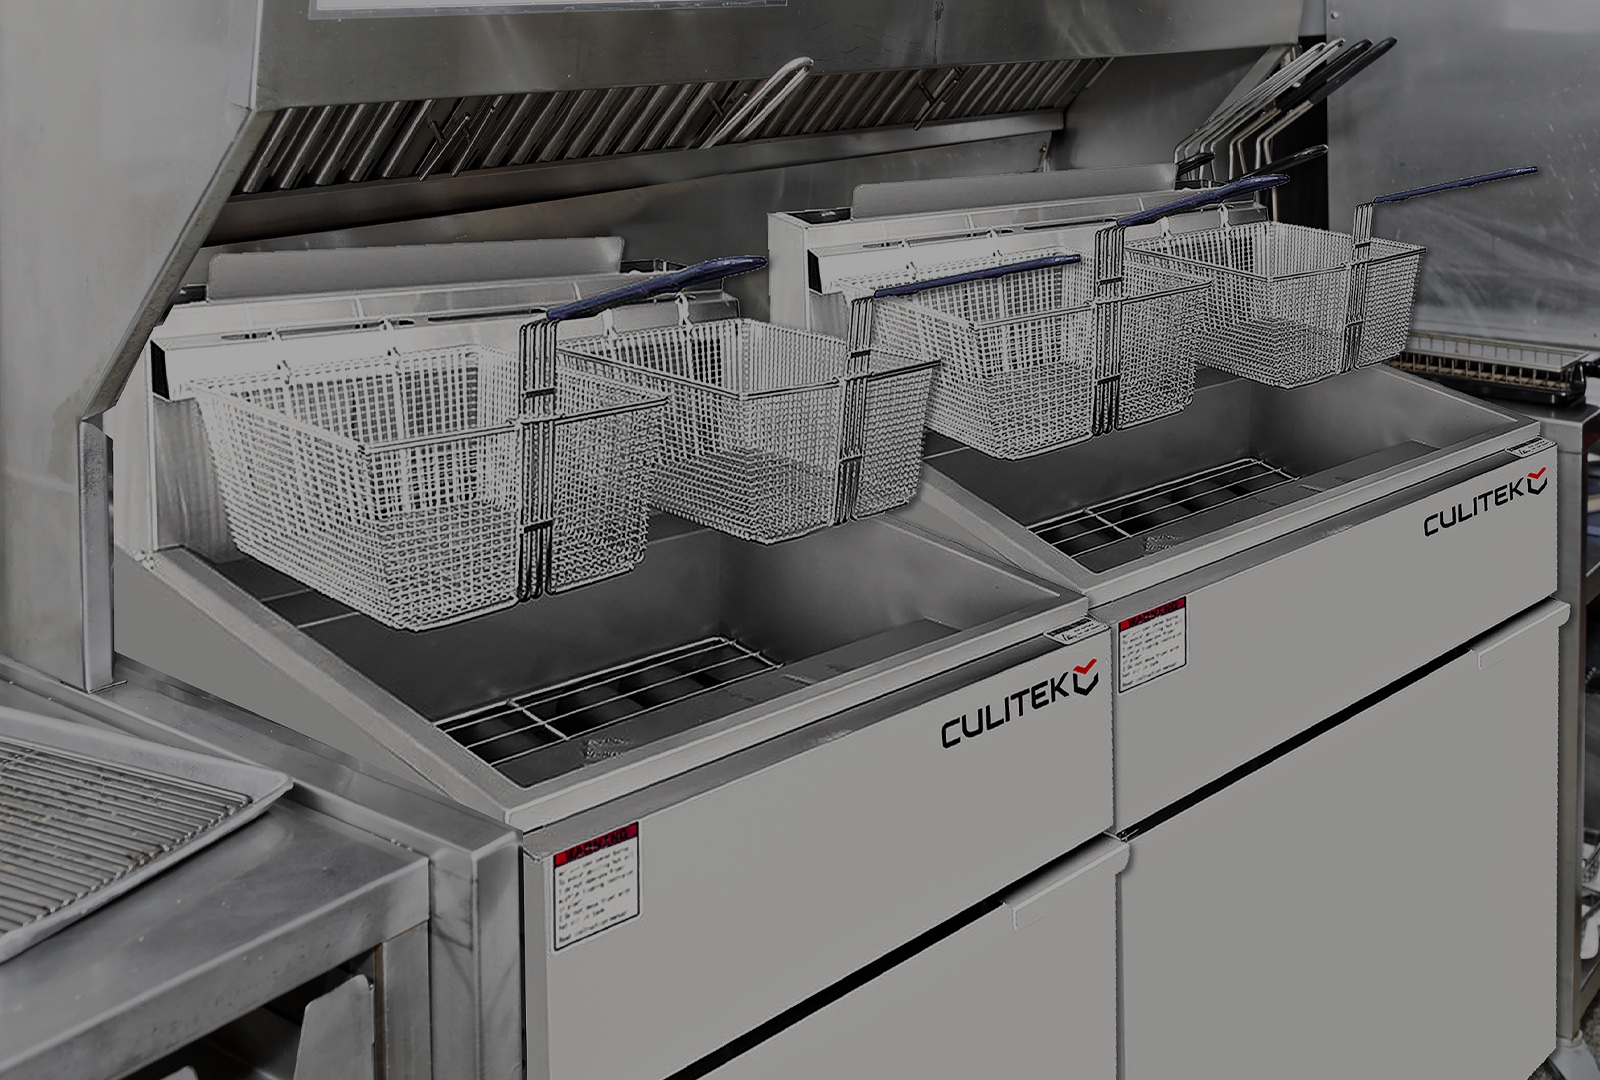 Deep fryer on commercial kitchen